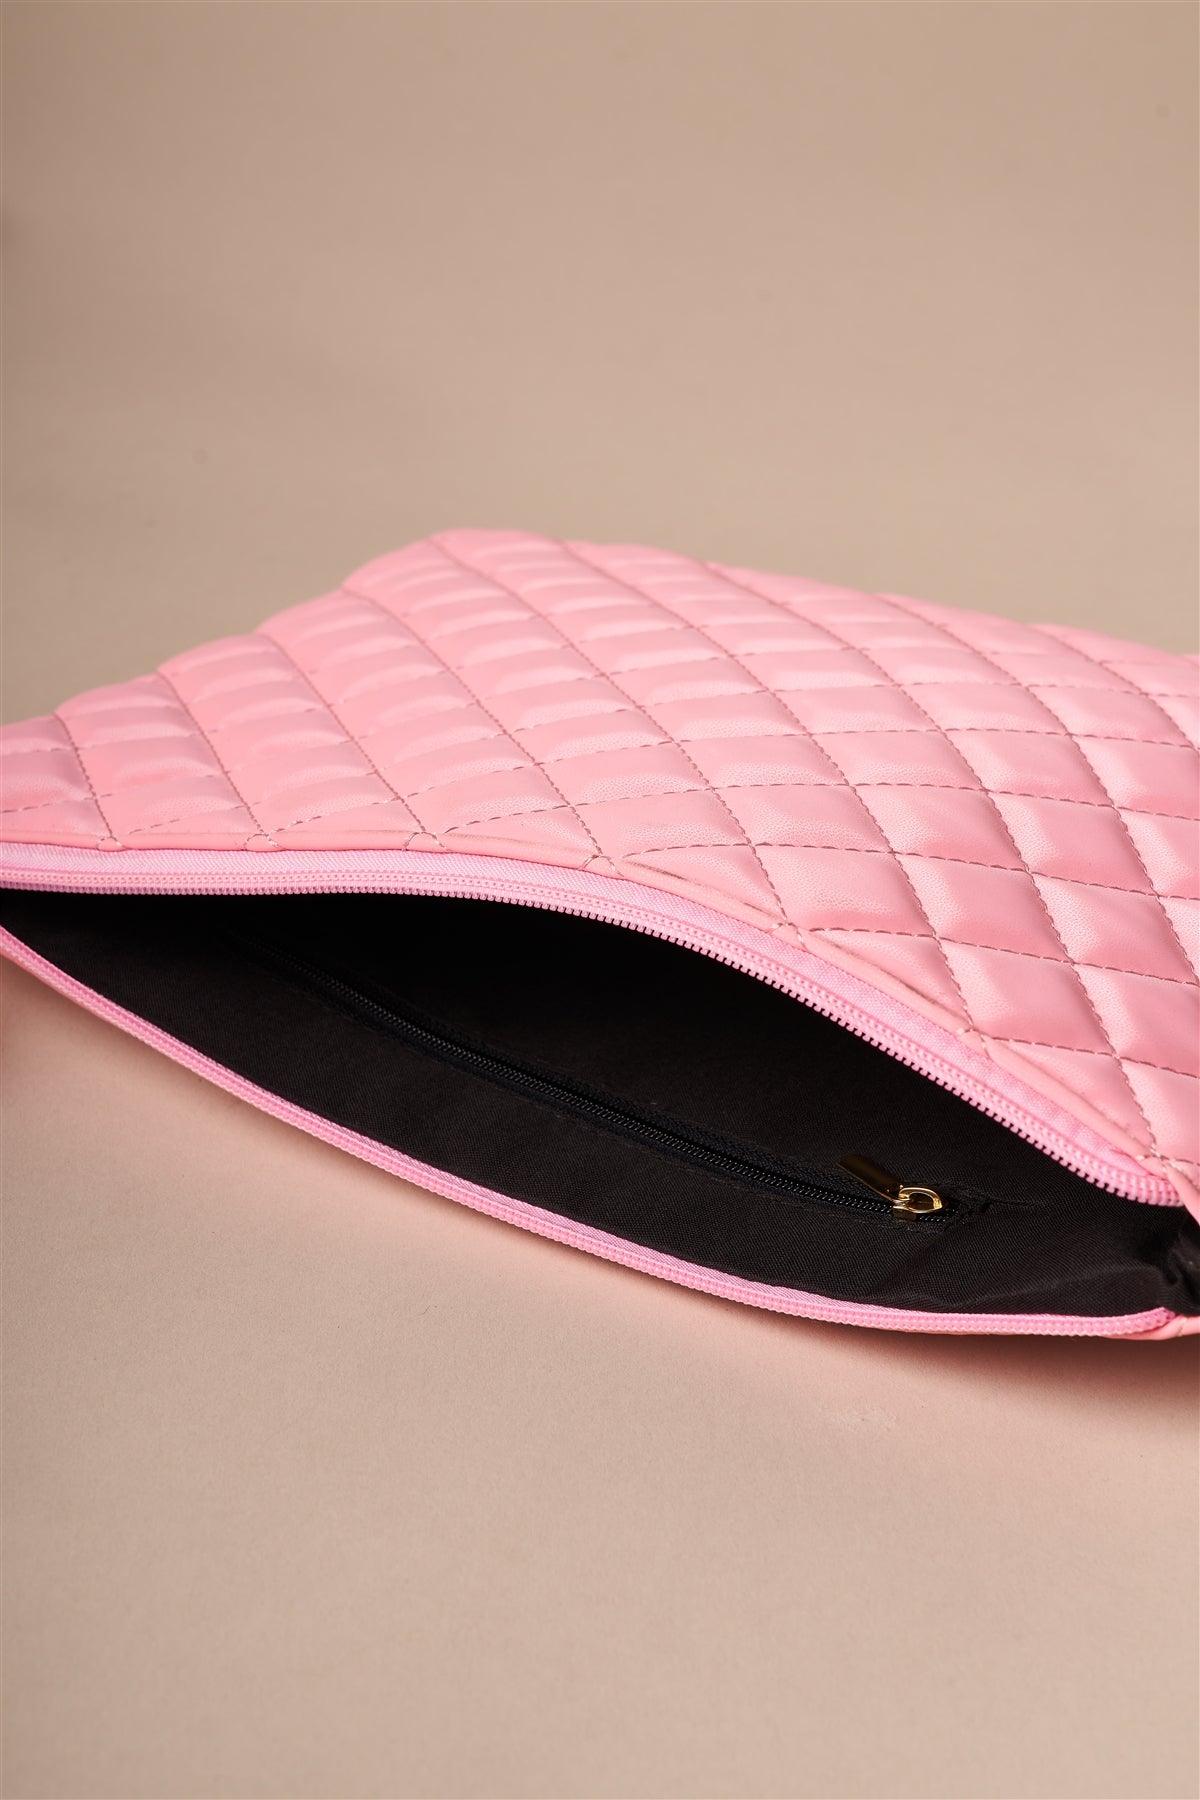 Pink Quilted Rectangle Pouch Bag /1 Bag